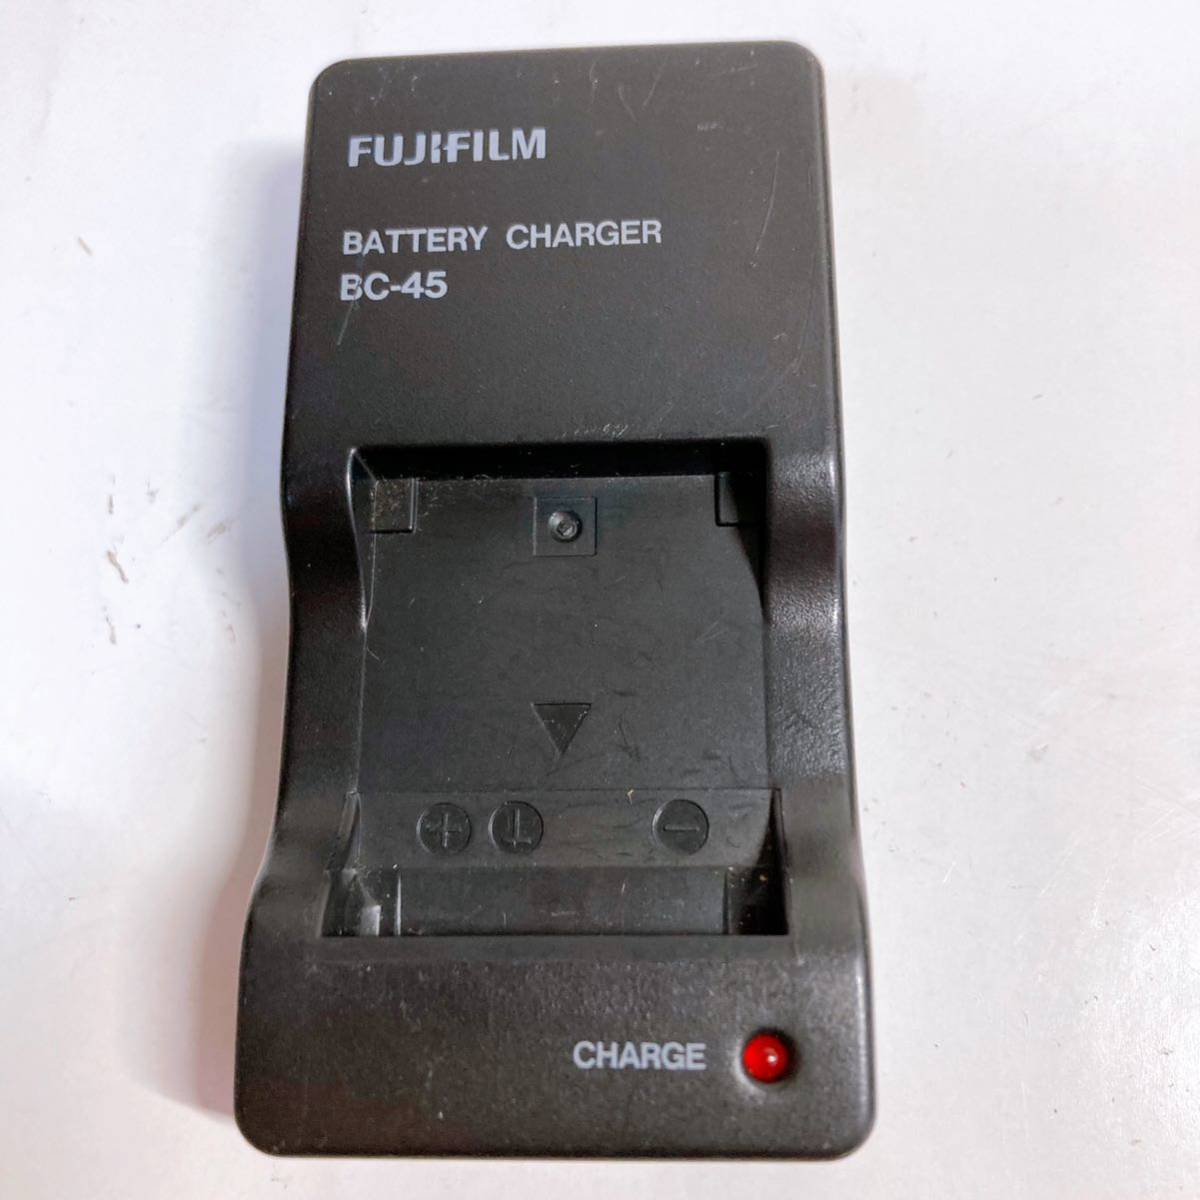  Fuji Film battery charger BC-45 electrification verification settled [FUJIFILM Fuji film ] charger 